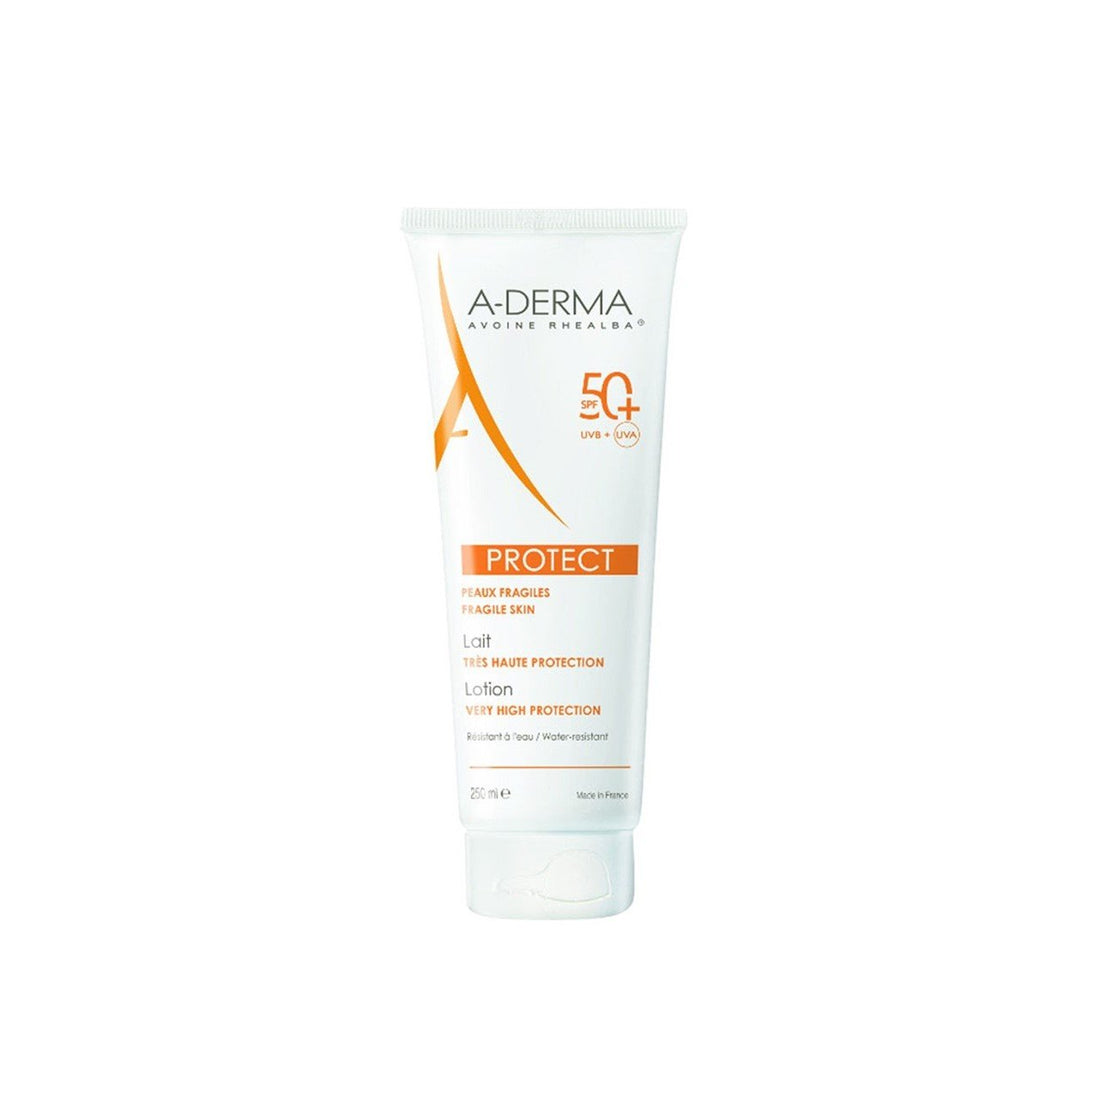 A-Derma Lotion Protectrice SPF50+ 250 ml